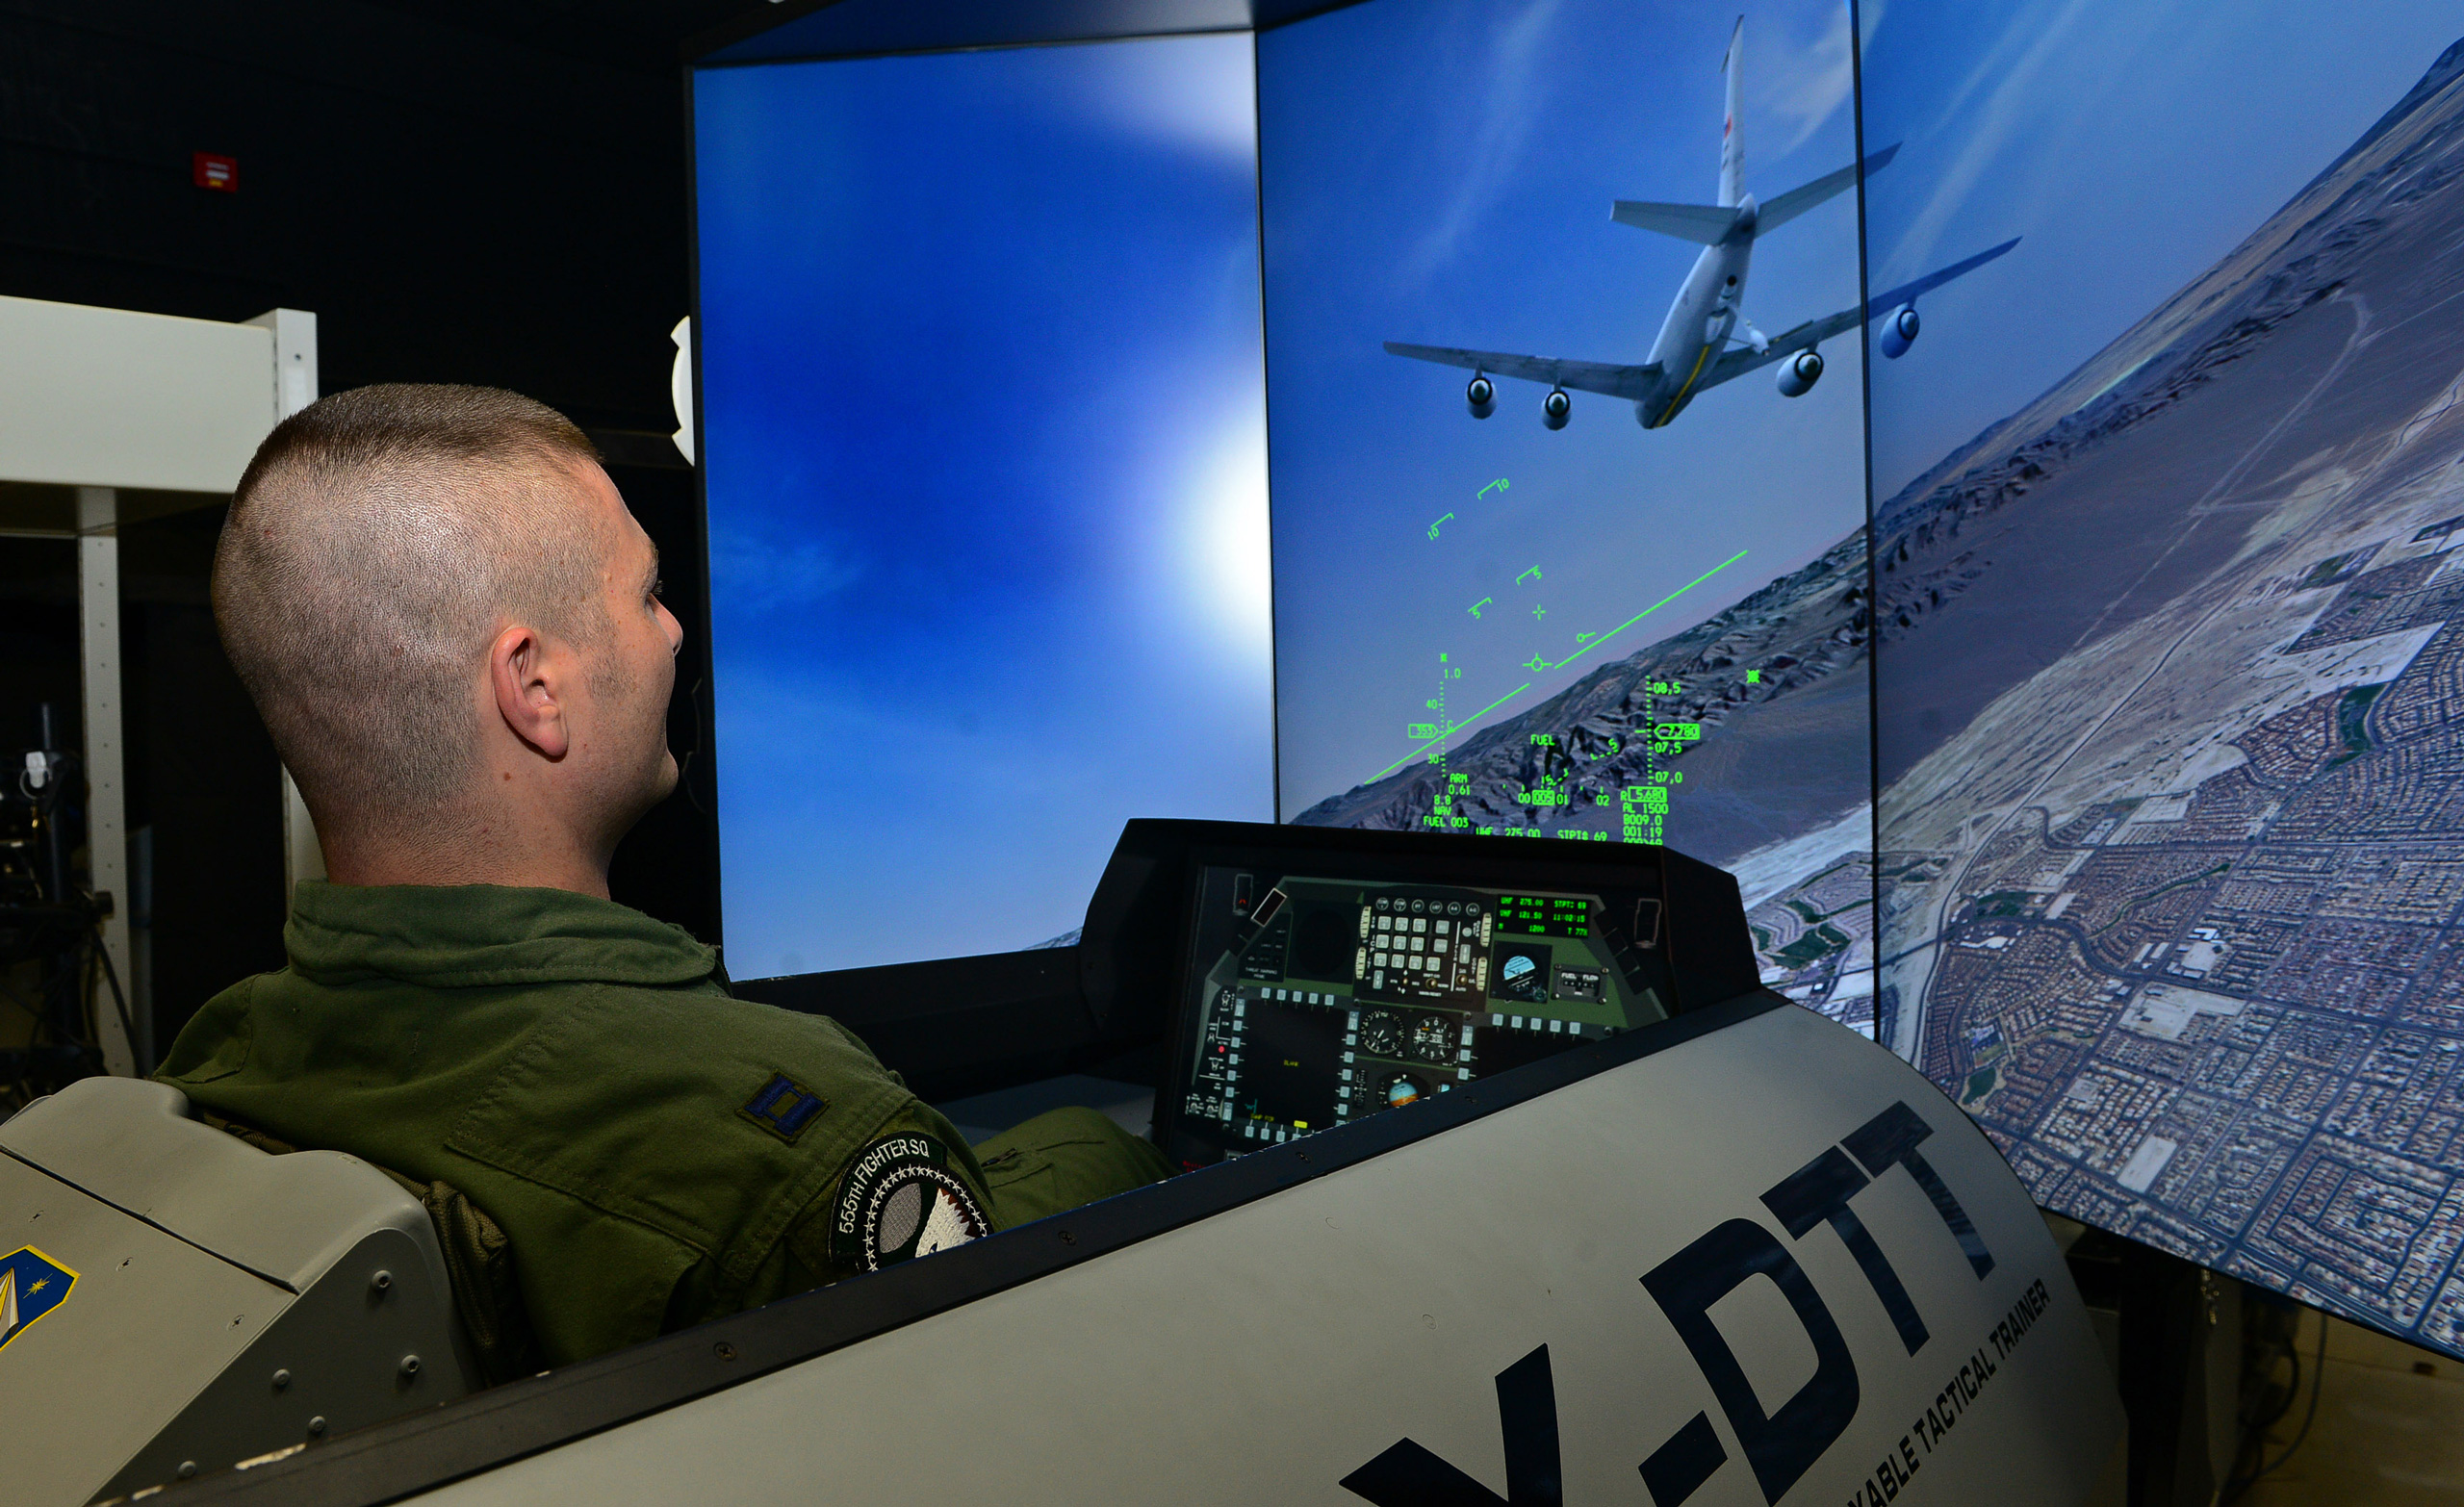 555th Fighter Squadron F-16 Fighting Falcon pilot, operates an F-16 simulator, at Aviano Air Base, Italy. The multi-channel synchronized view is driven by MetaVR VRSG. (U.S. Air Force photo by Senior Airman Matthew Lotz/Released.)